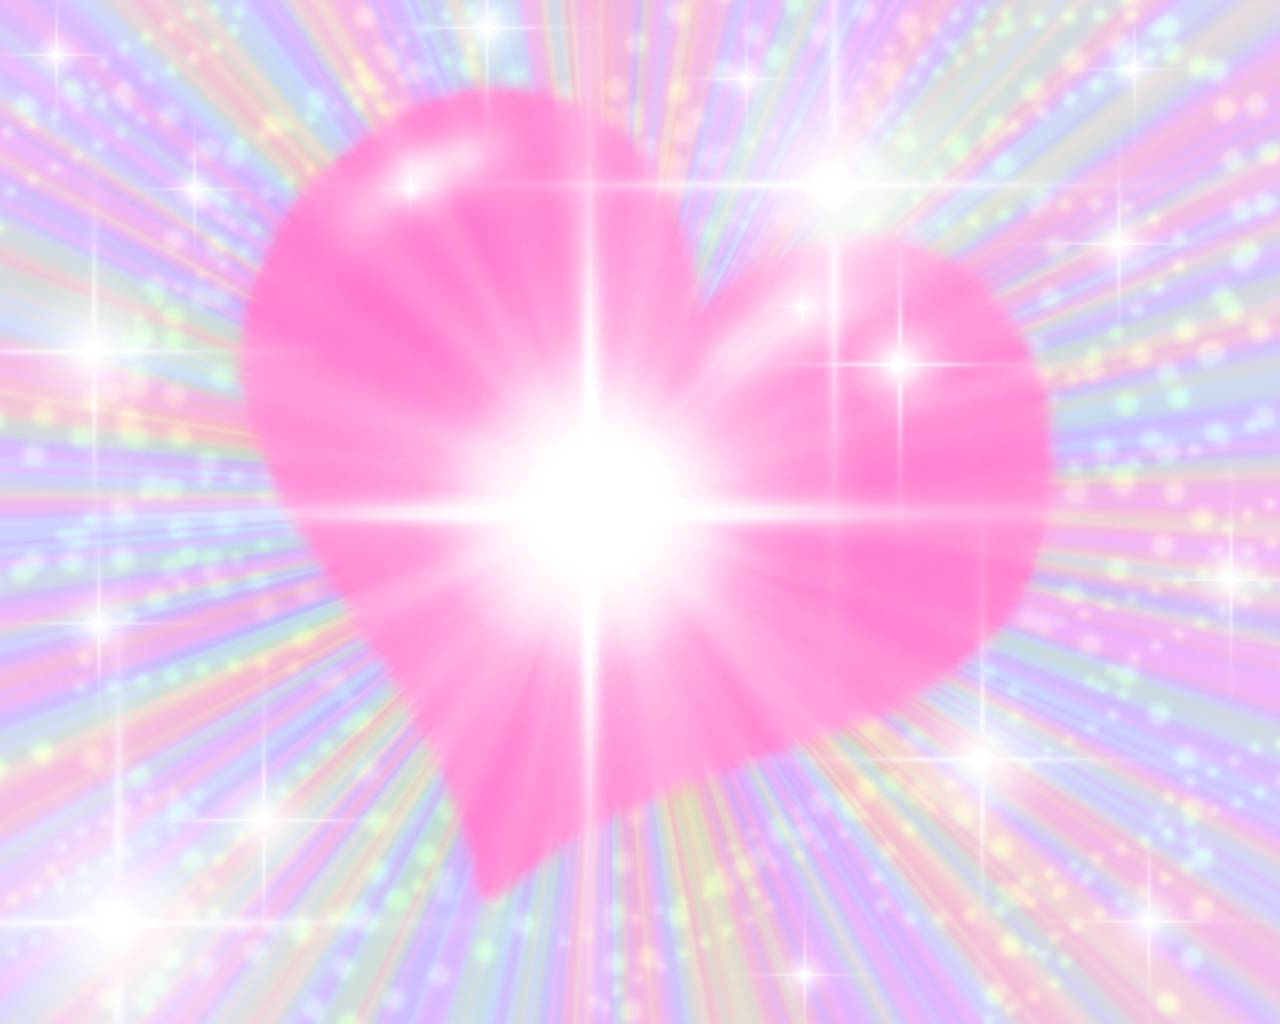 Hot Pink Heart Background Image Amp Pictures Becuo